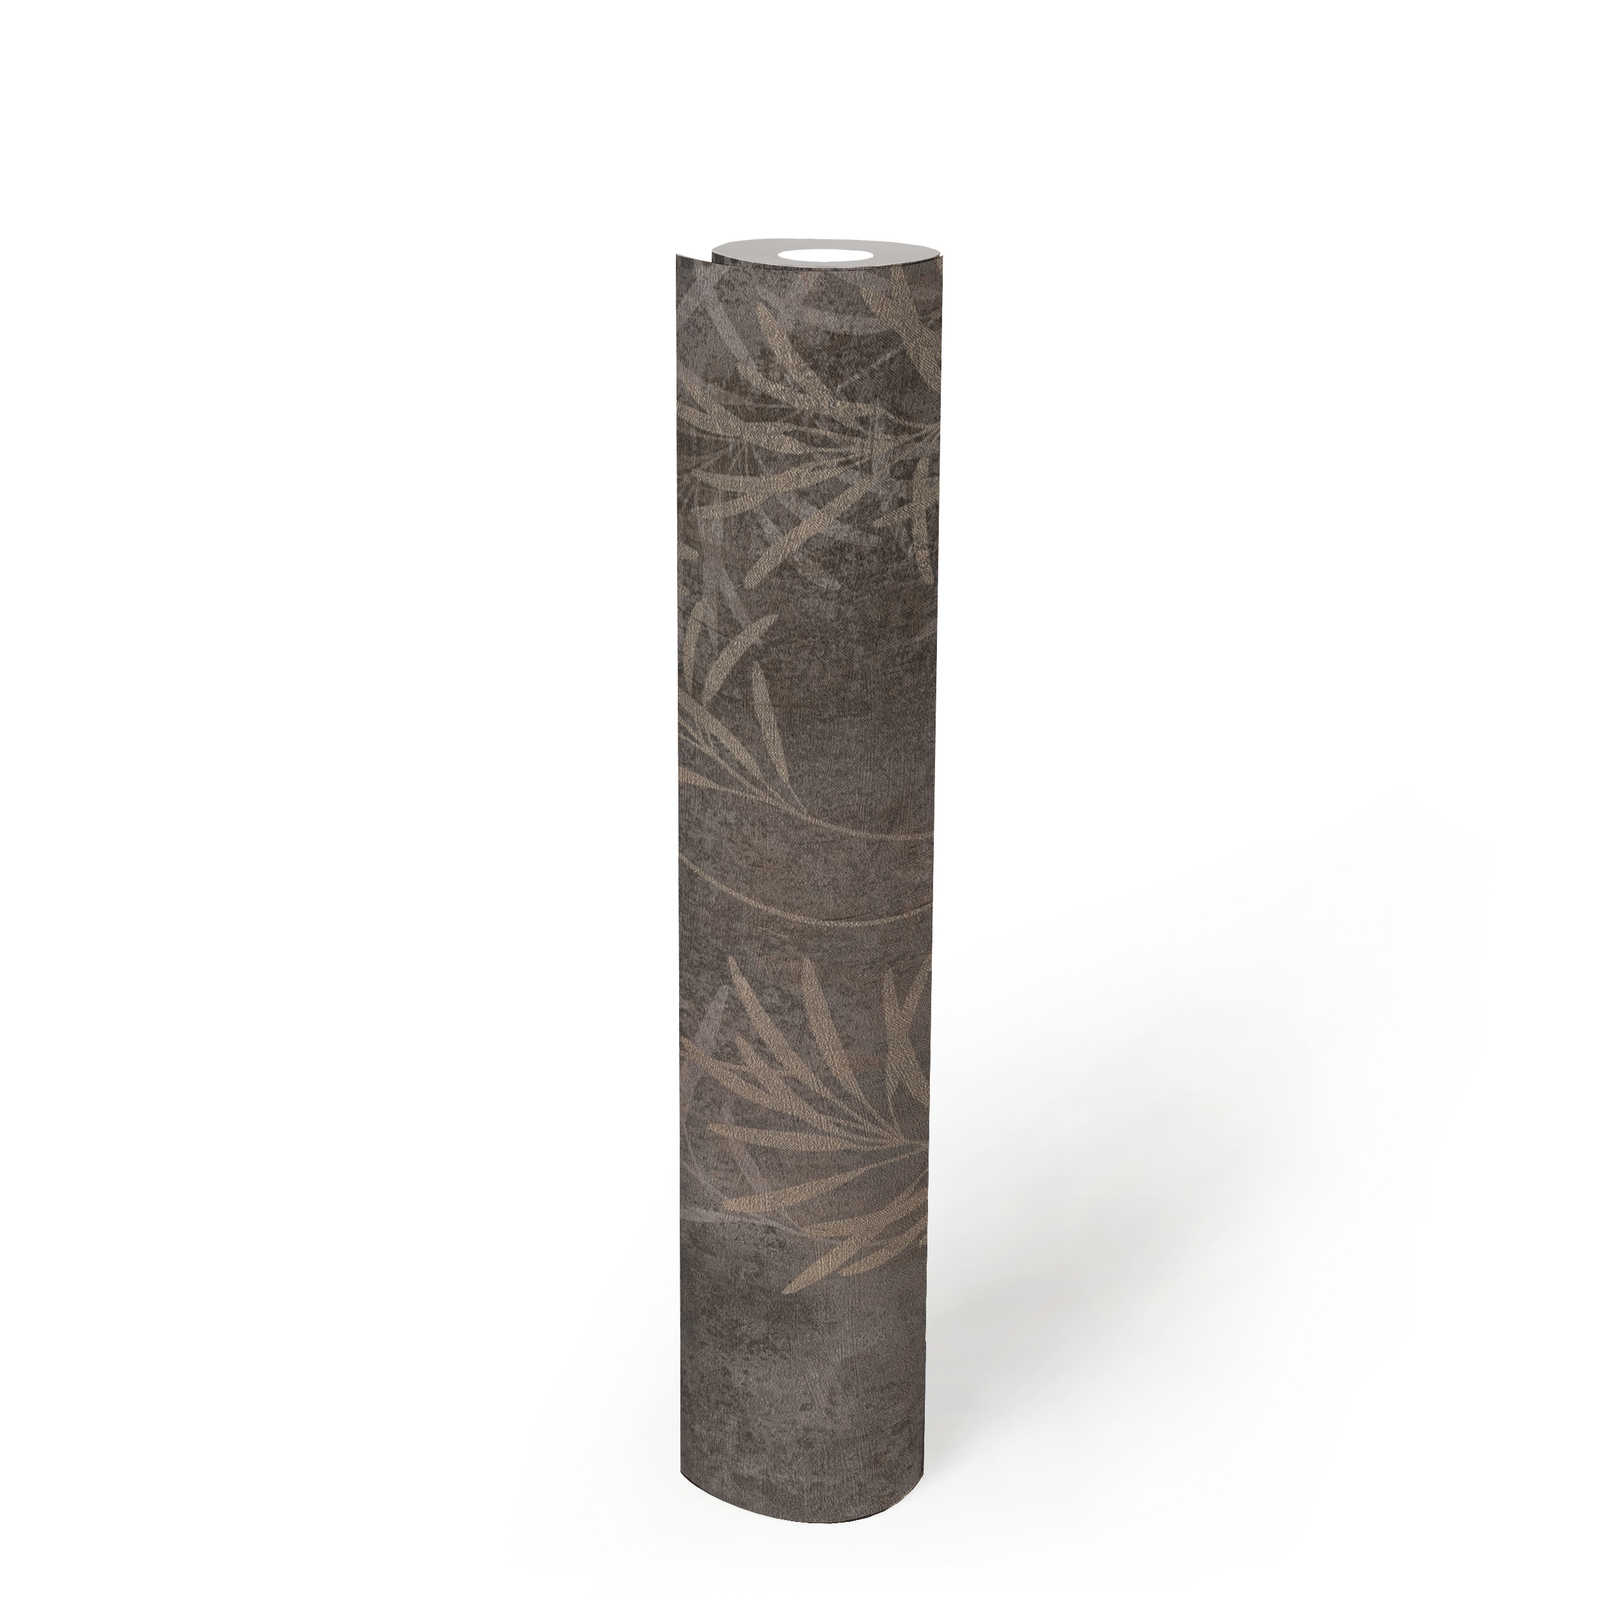             Floral non-woven wallpaper with grass pattern and fine structure - grey, beige, metallic
        